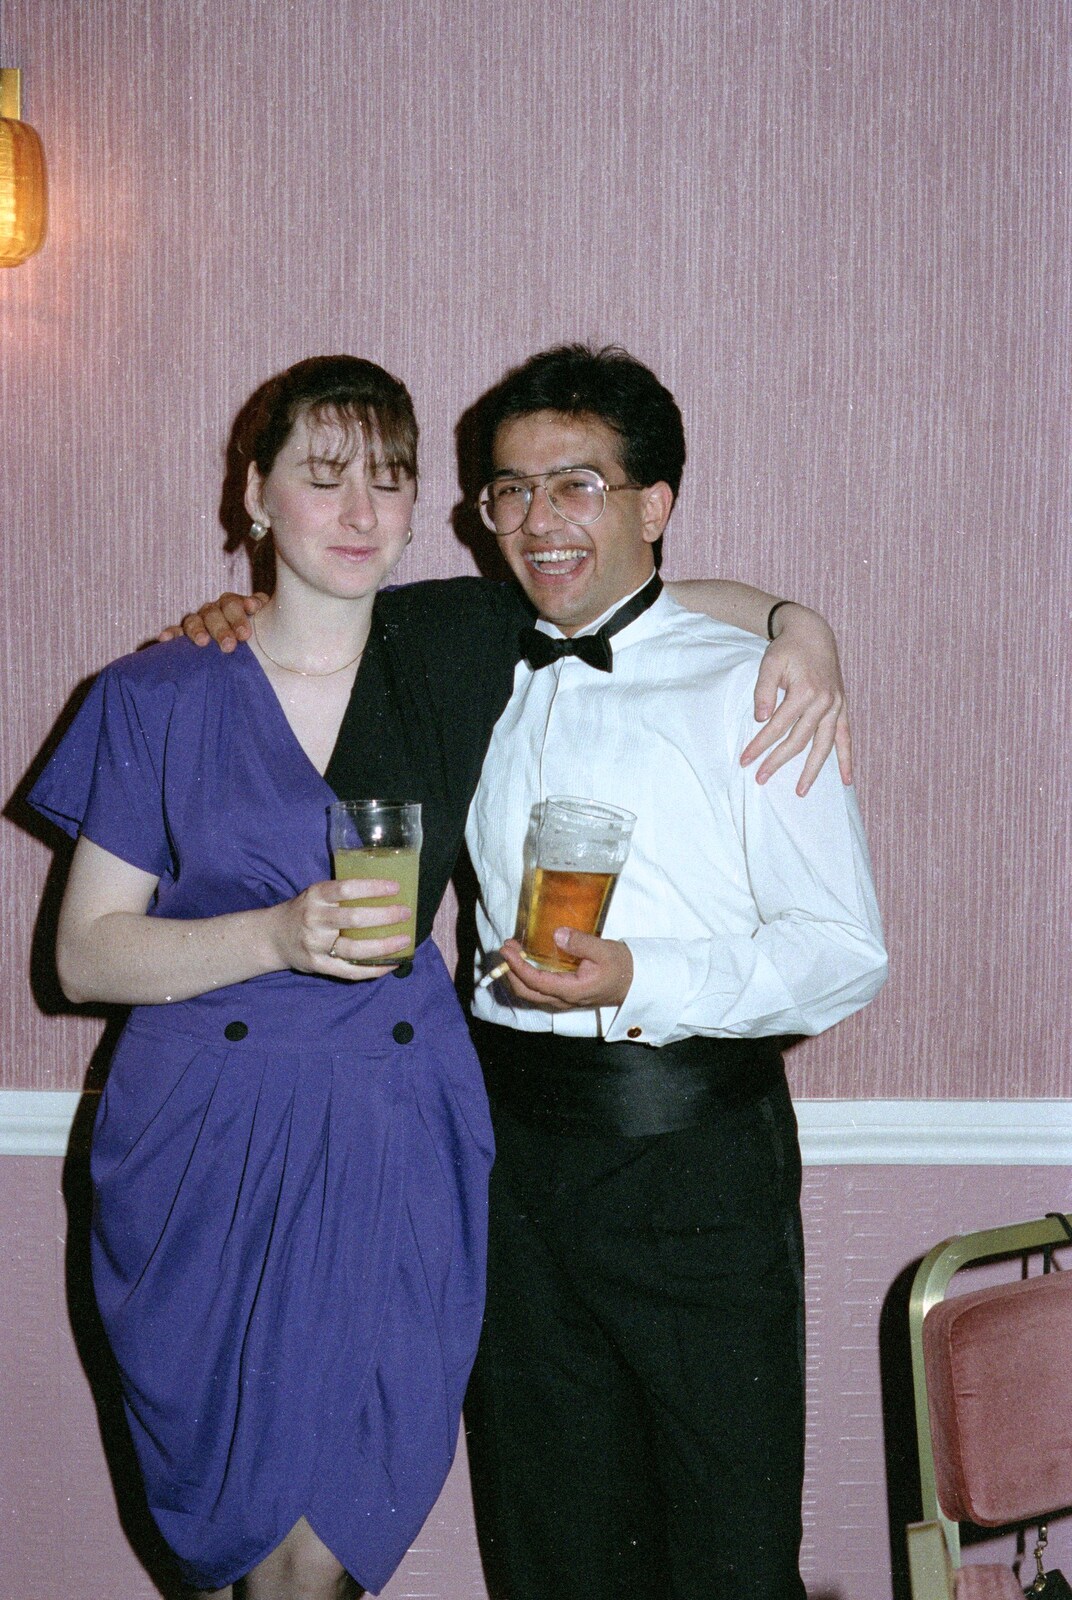 Jackie and friend from Uni: The BABS End-of-Course Ball, New Continental Hotel, Plymouth - 21st June 1989